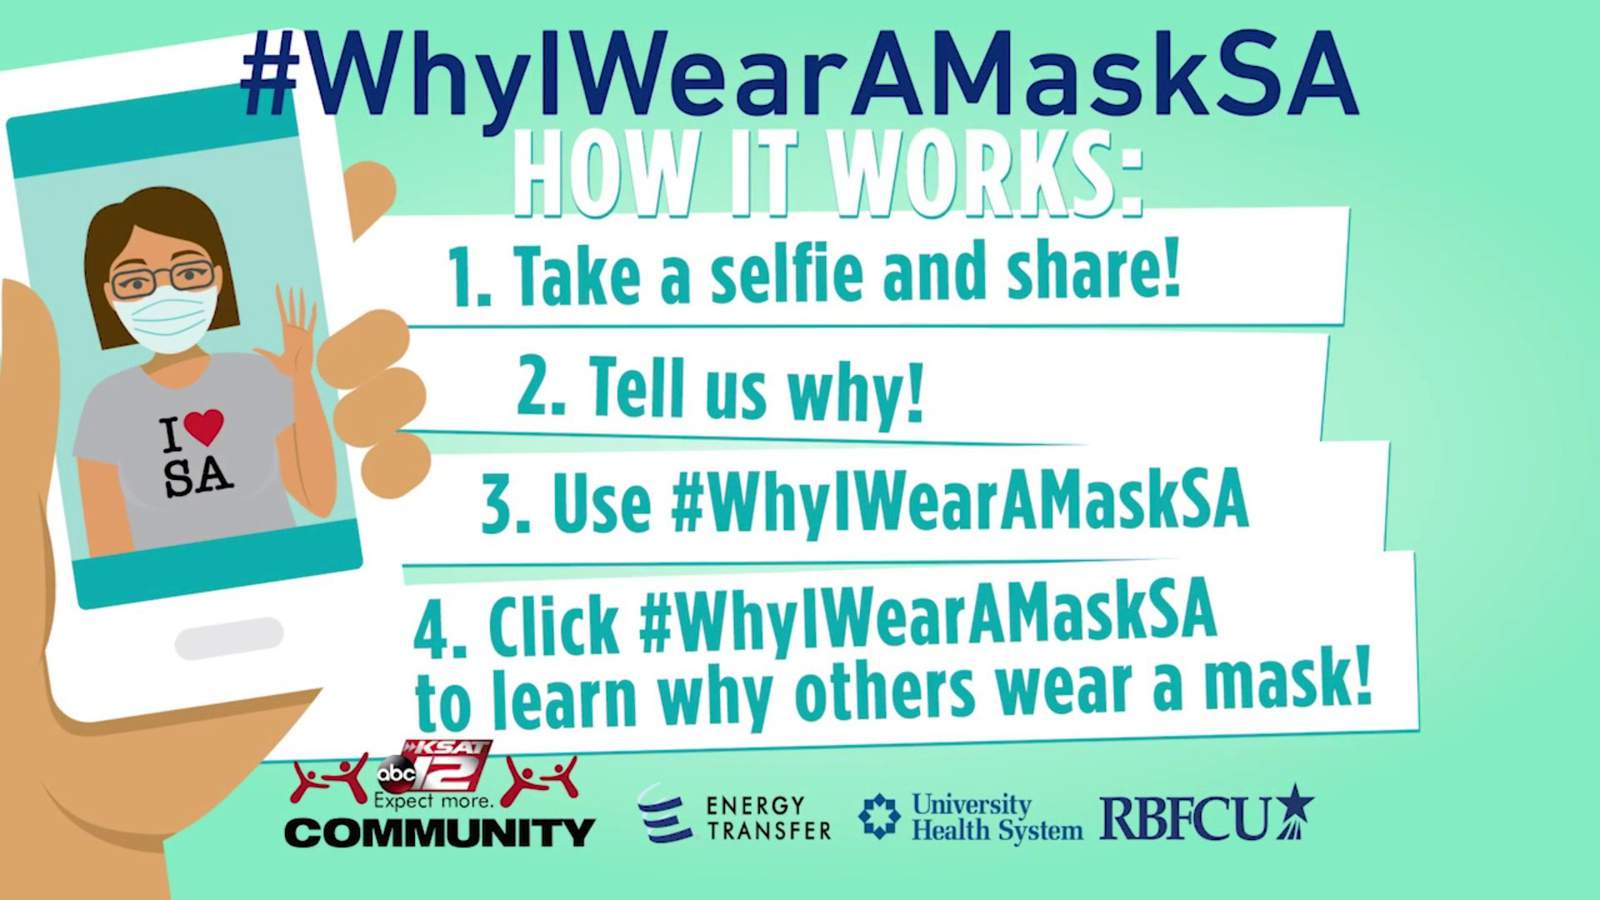 Snap a selfie: Who do you wear a face mask for? We want to know